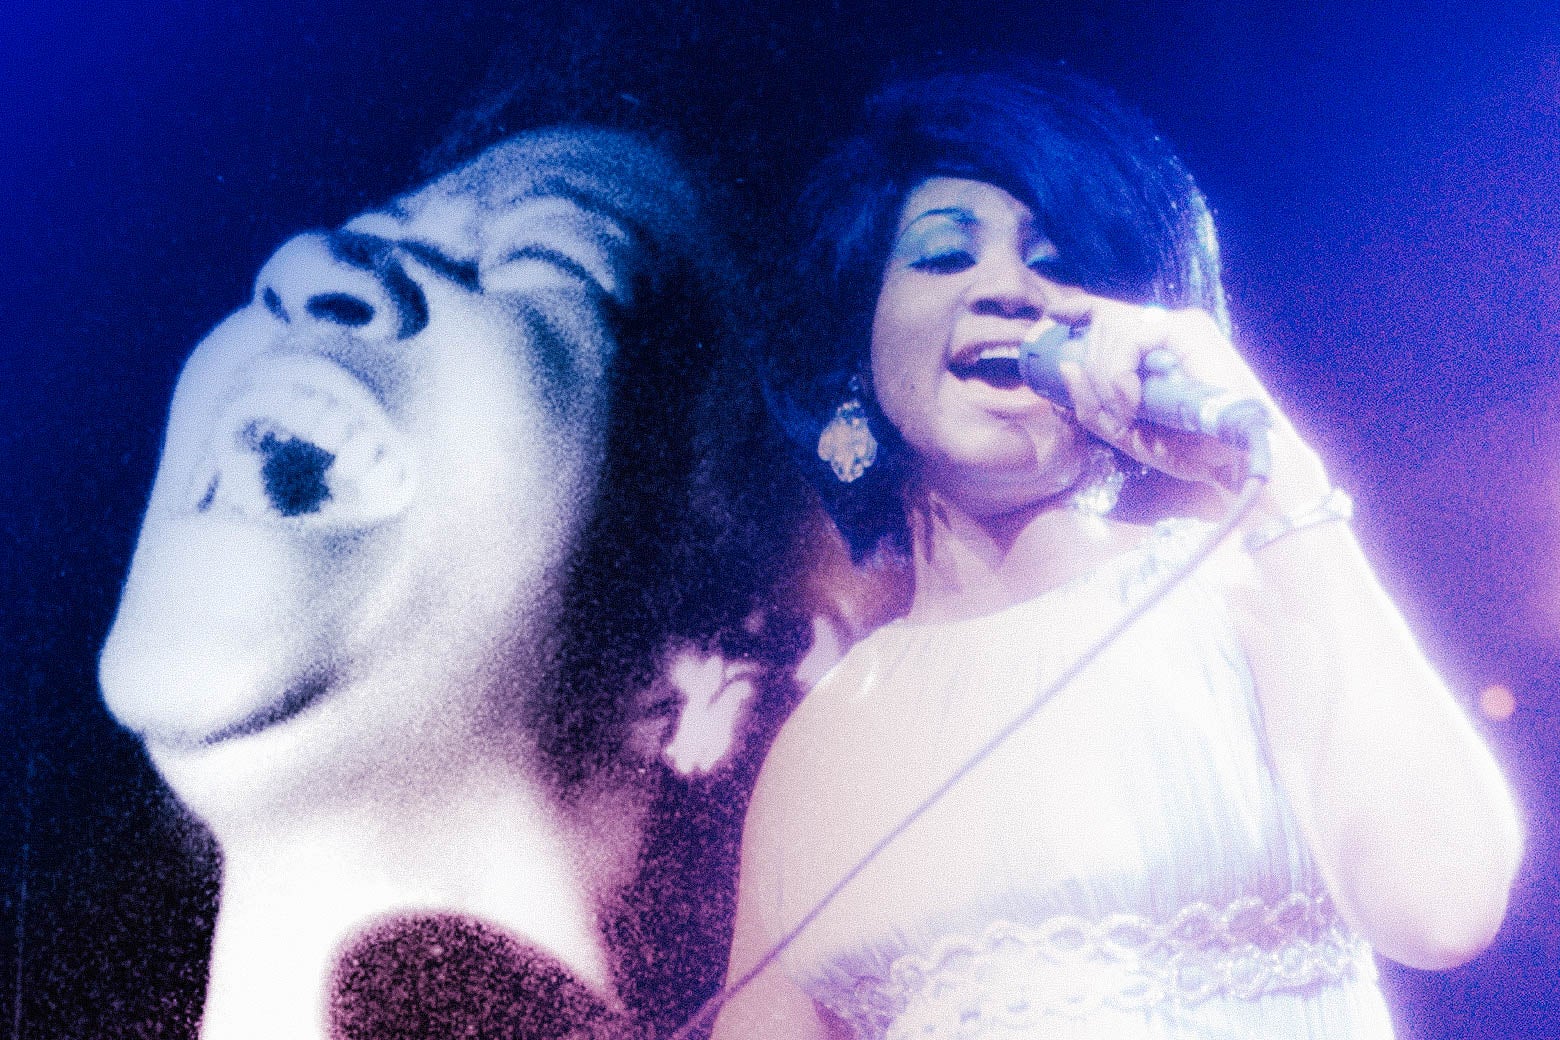 Collage of two photos of Aretha Franklin.